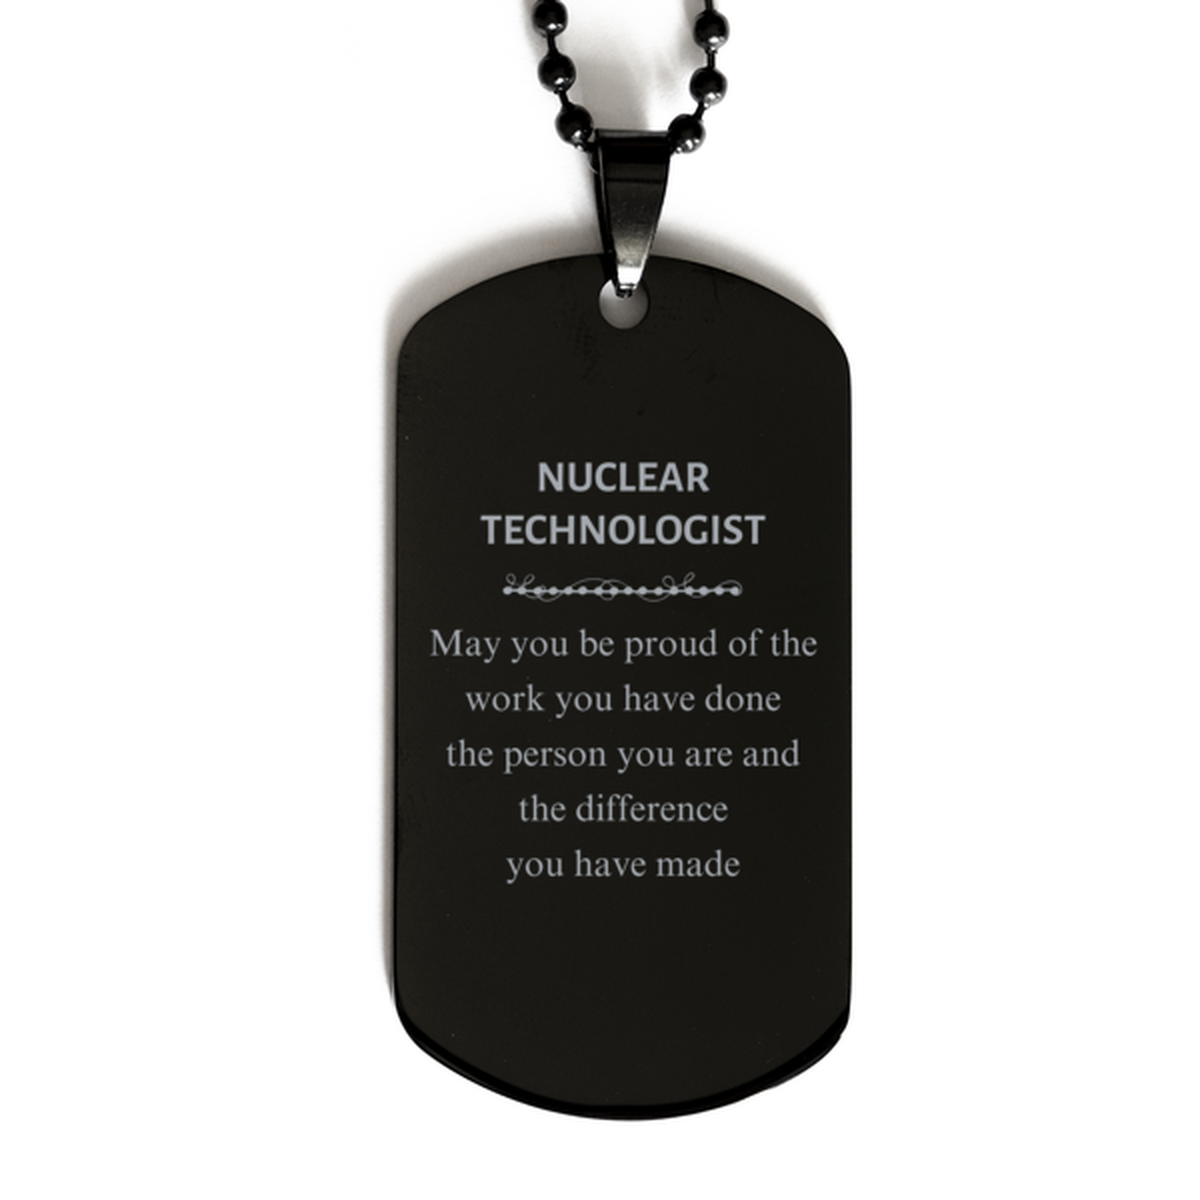 Nuclear Technologist May you be proud of the work you have done, Retirement Nuclear Technologist Black Dog Tag for Colleague Appreciation Gifts Amazing for Nuclear Technologist